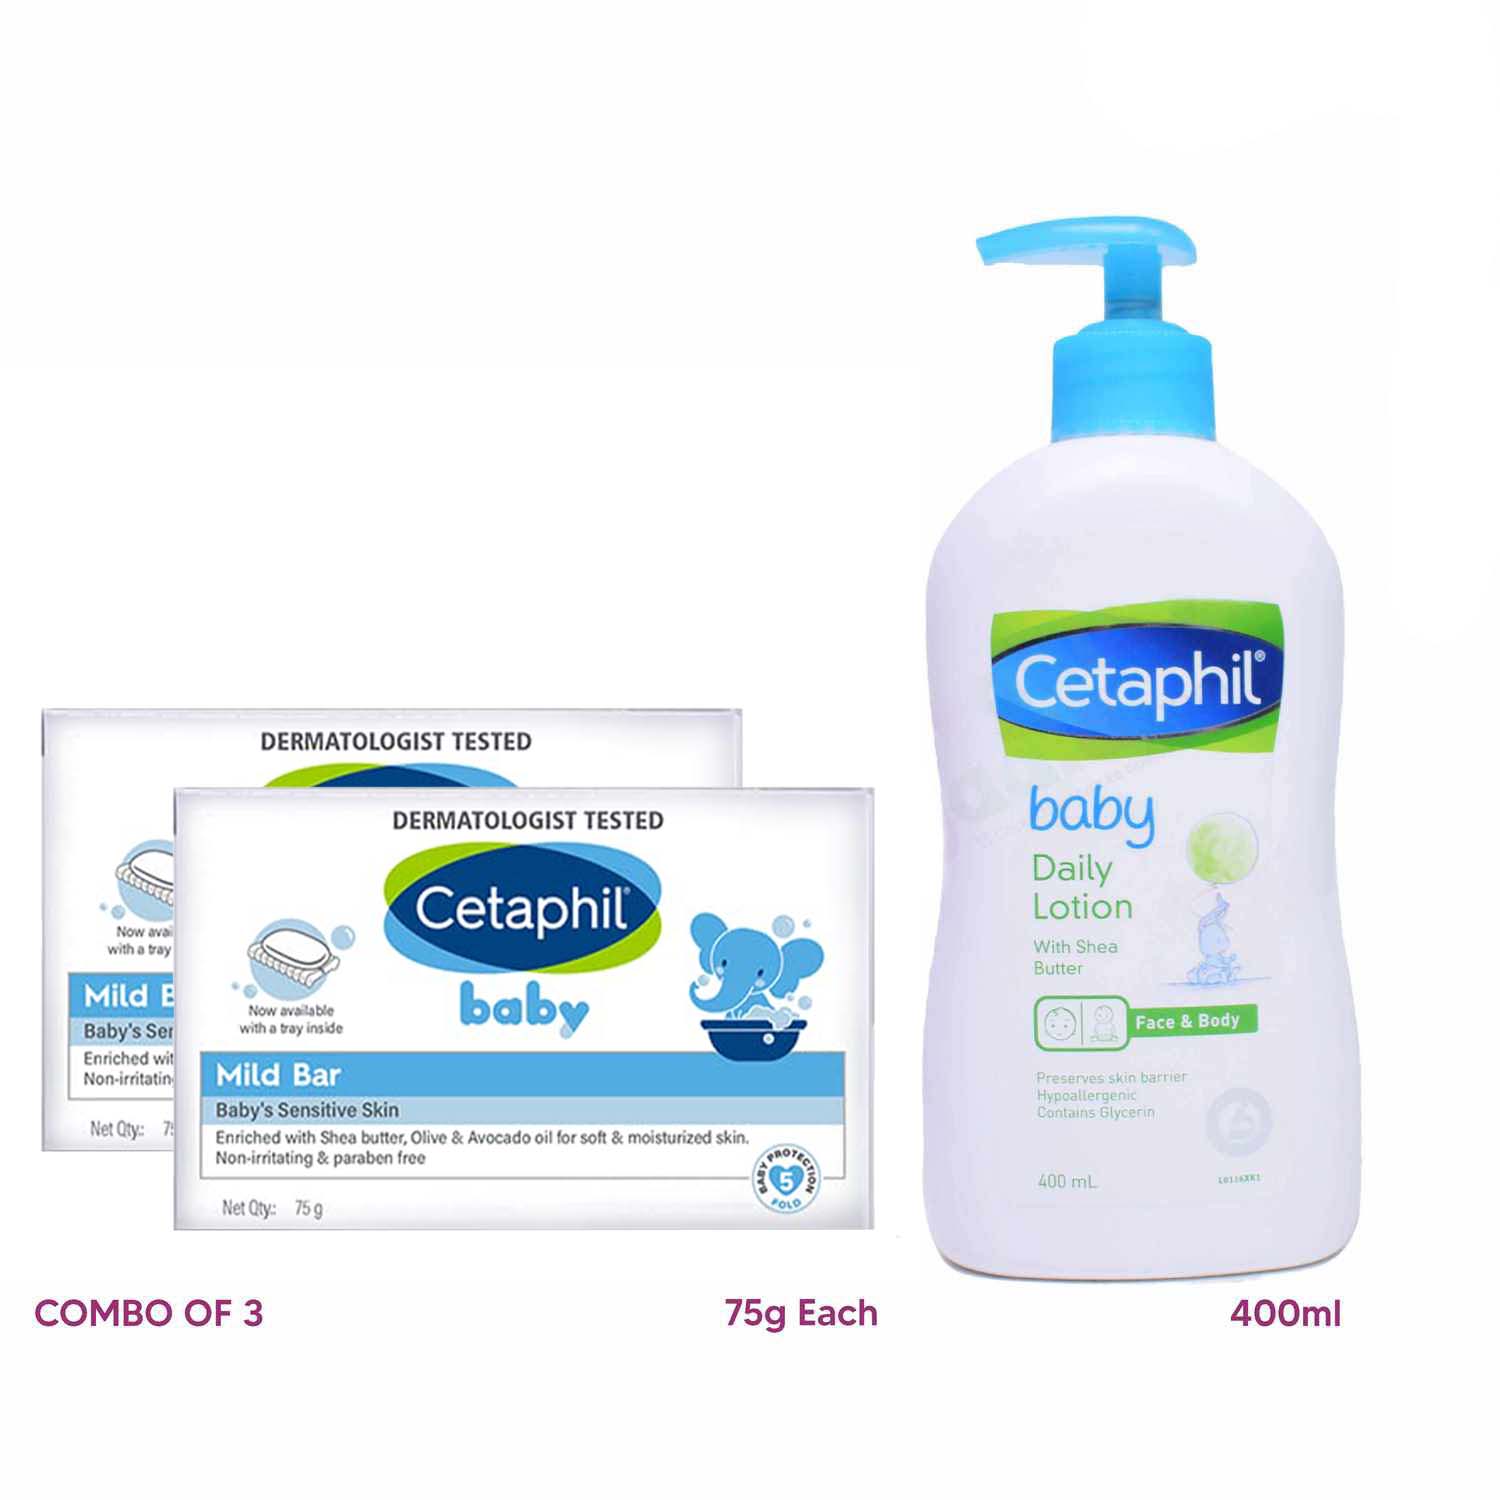 CETAPHIL Baby Soaps 75g (Pack of 2) & Daily Lotion 400ml (1) Combo pack